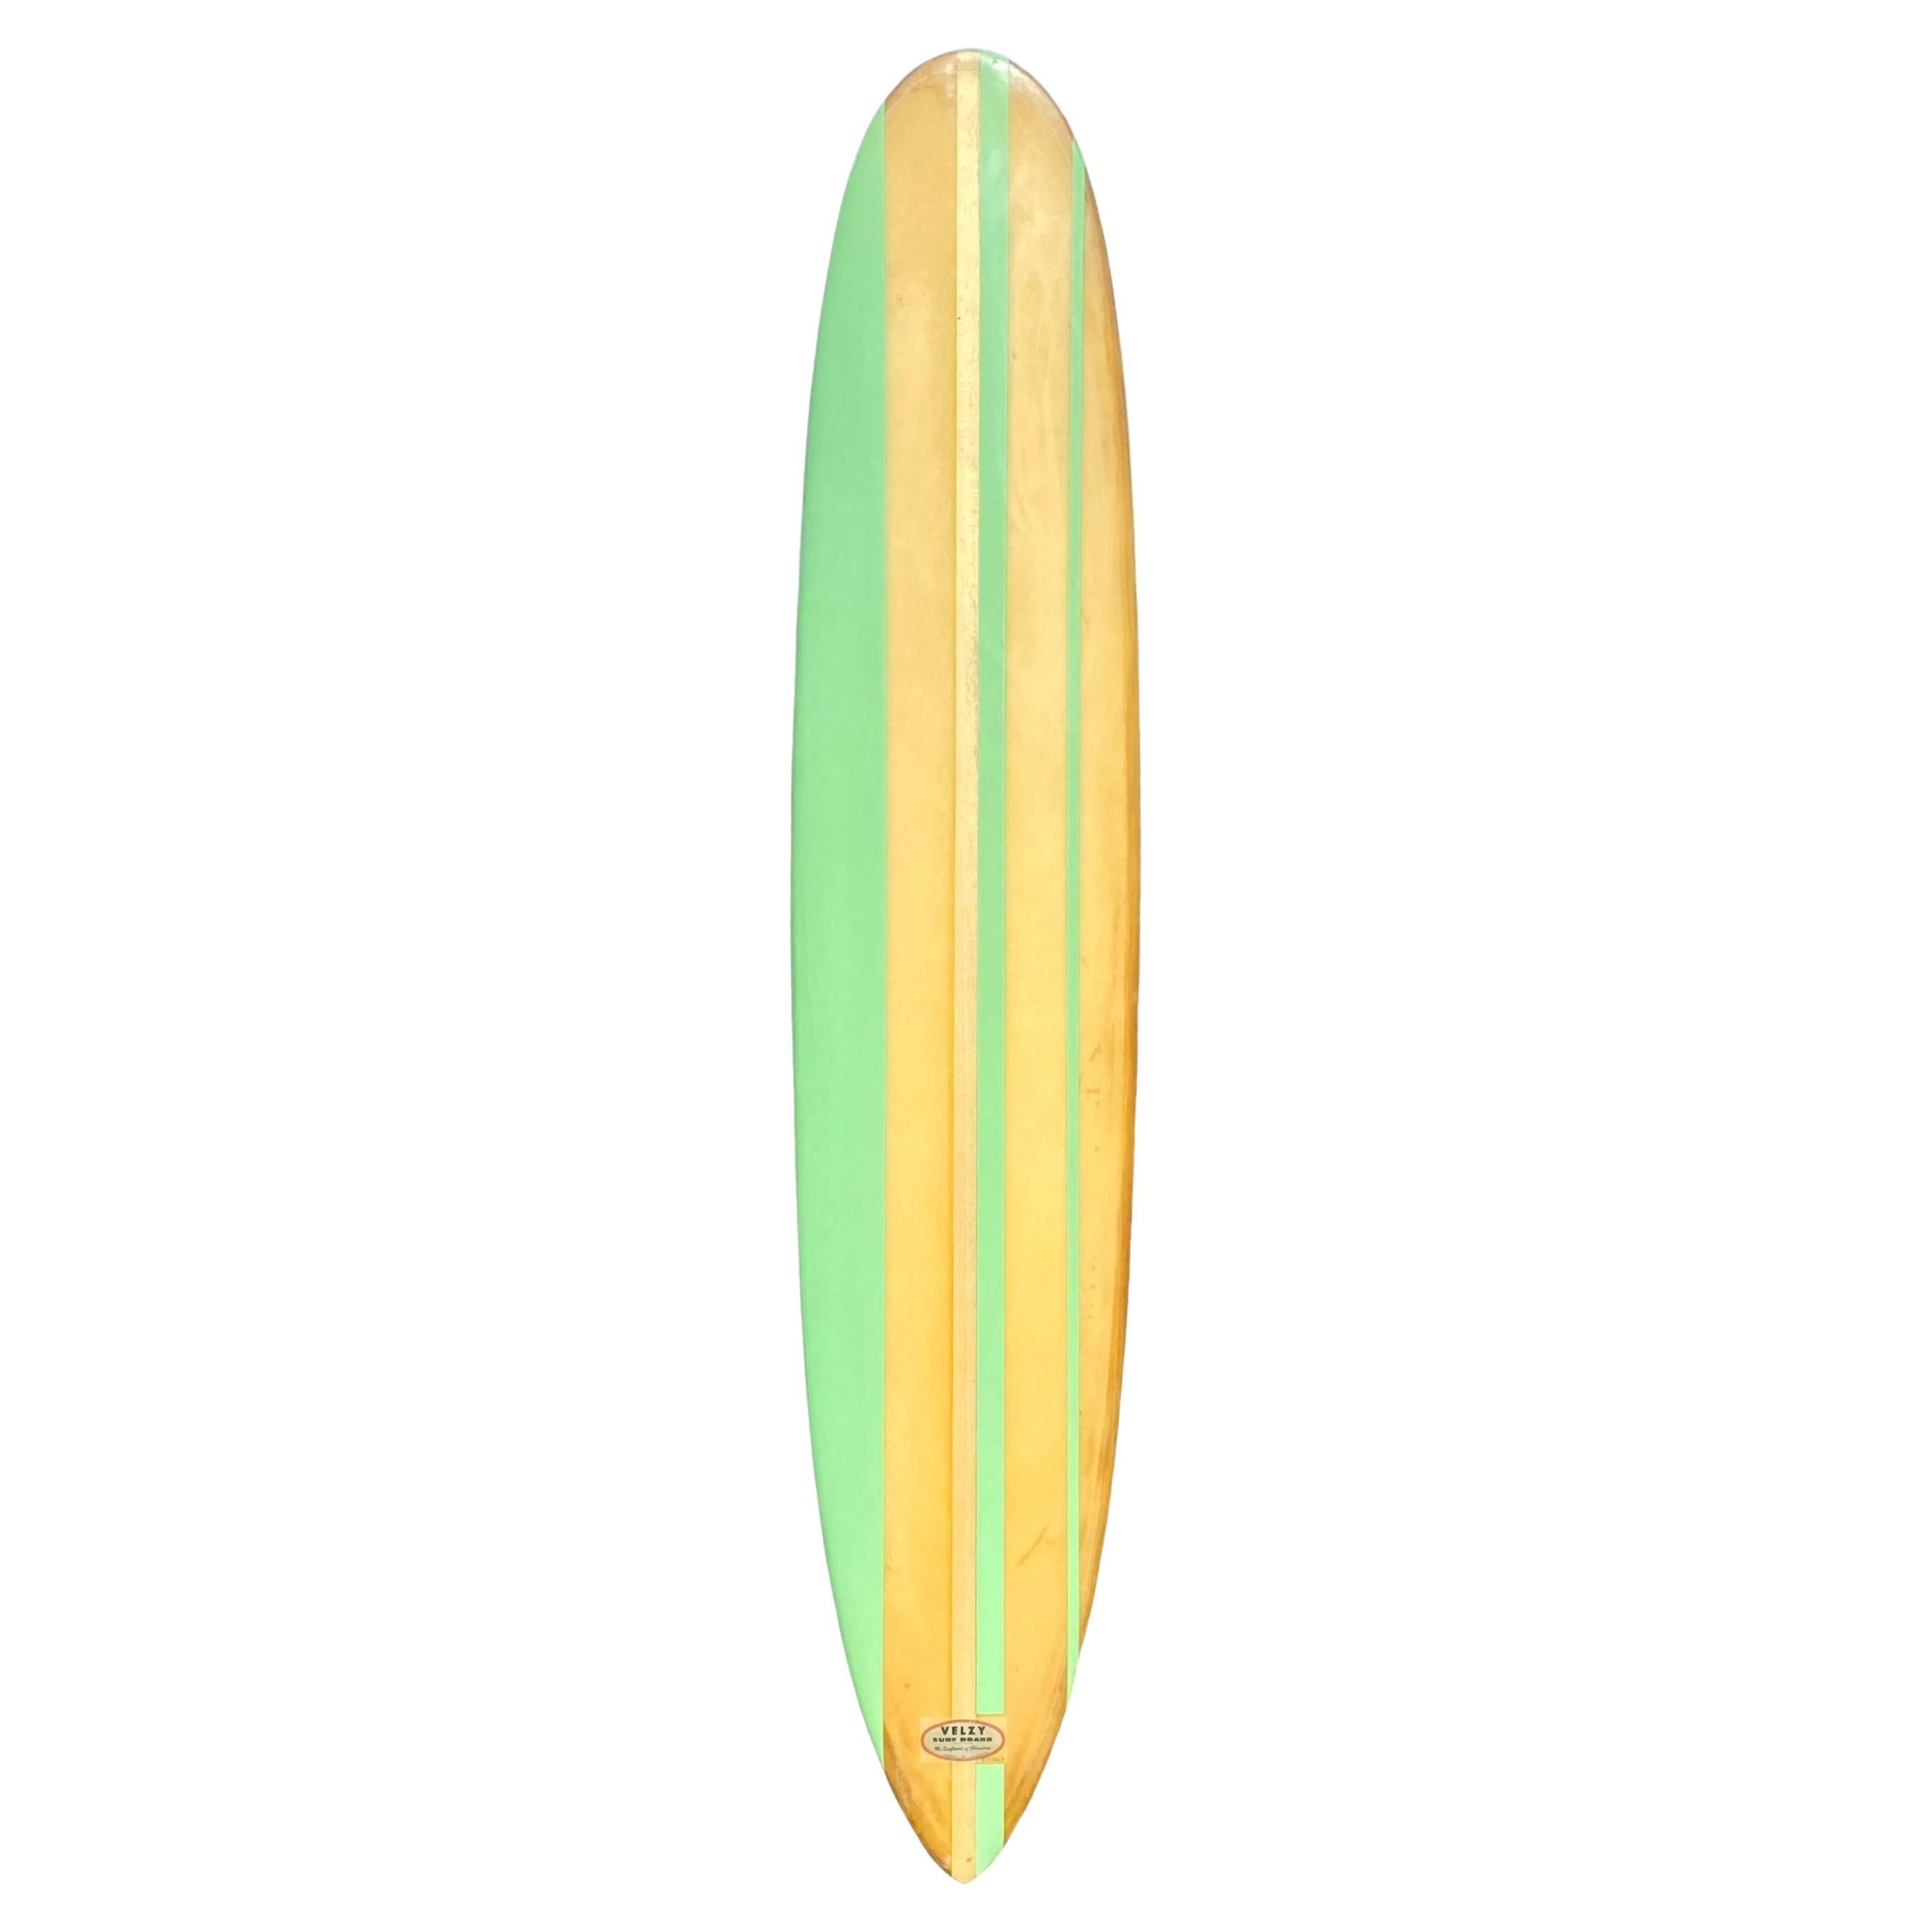 Early-1960s Vintage Dale Velzy classic pintail longboard